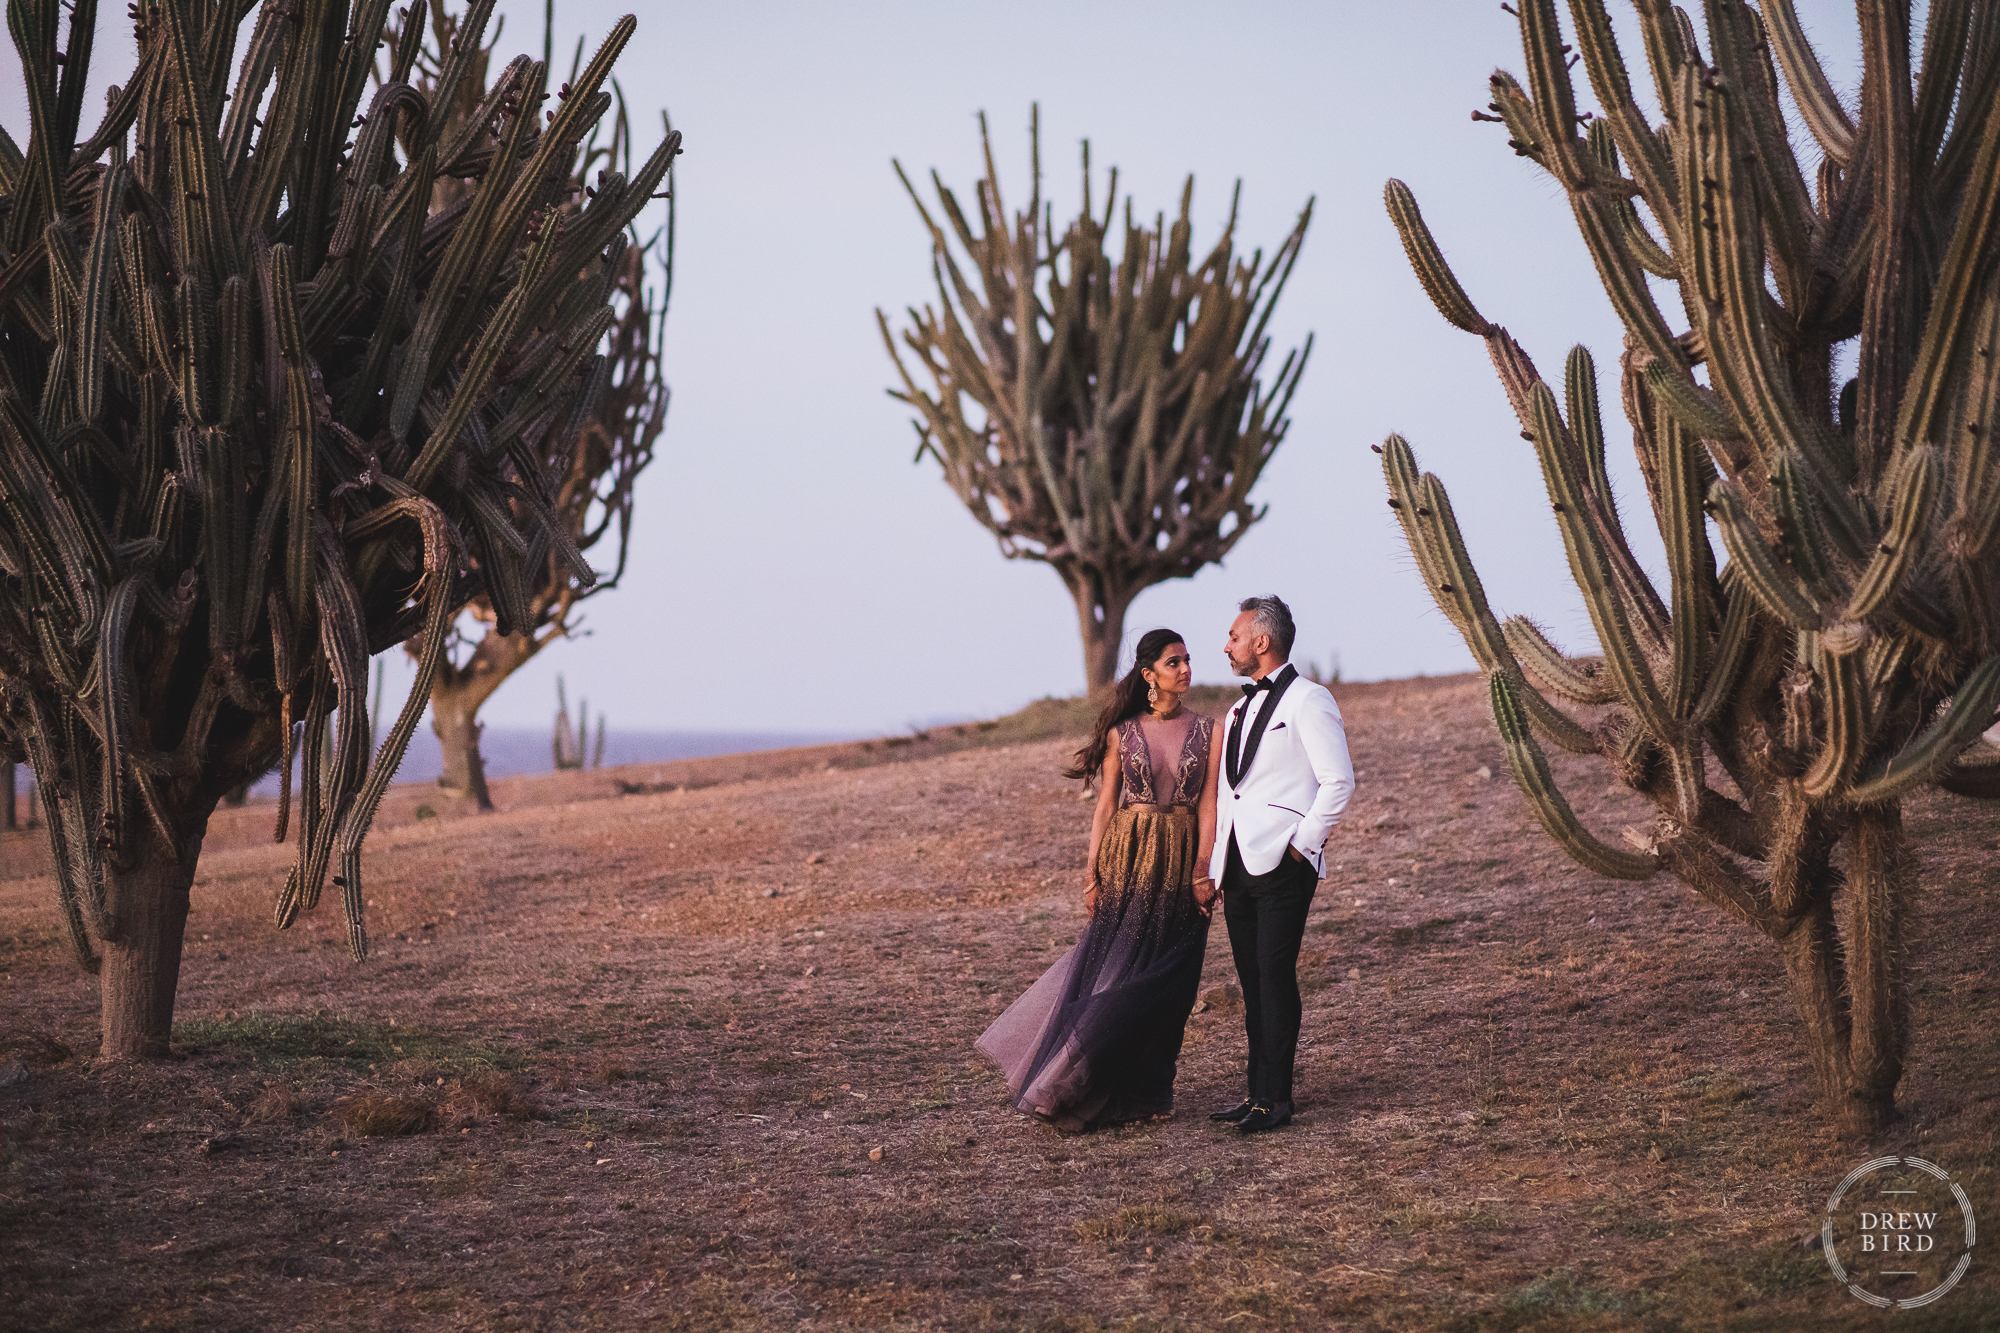 An indian wedding bride and groom dressed in western evening attire, a beautiful cocktail dress and a white jacket tuxedo, stand for a wedding portrait amongst giant cactus at Tierra del Sol on the Caribbean Island of Aruba by destination wedding photographer Drew Bird.